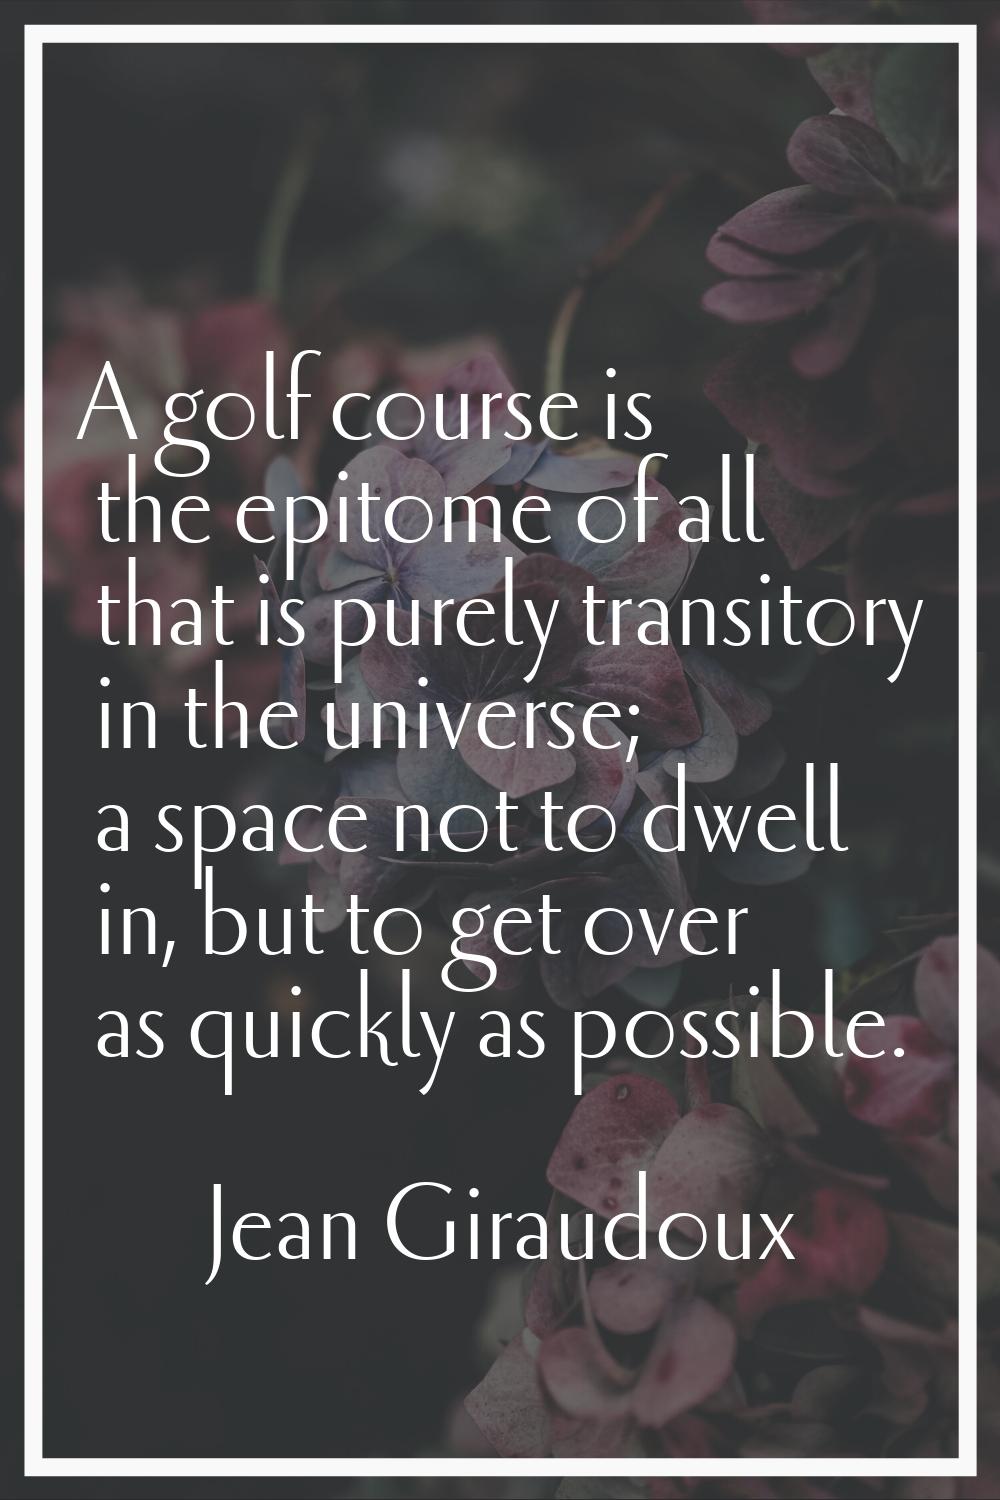 A golf course is the epitome of all that is purely transitory in the universe; a space not to dwell